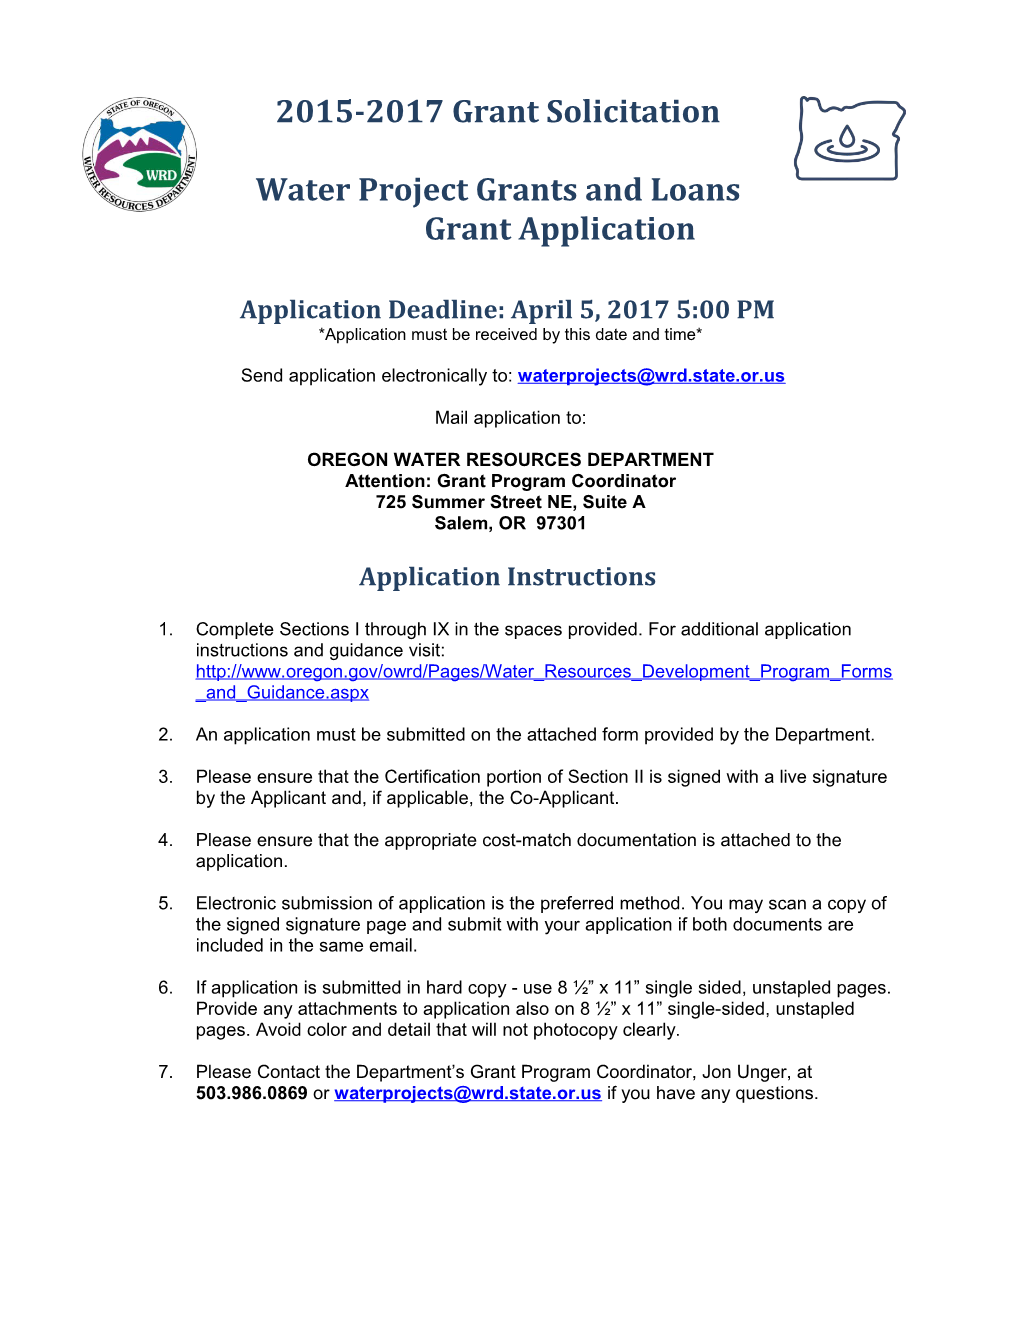 Water Project Grants and Loans